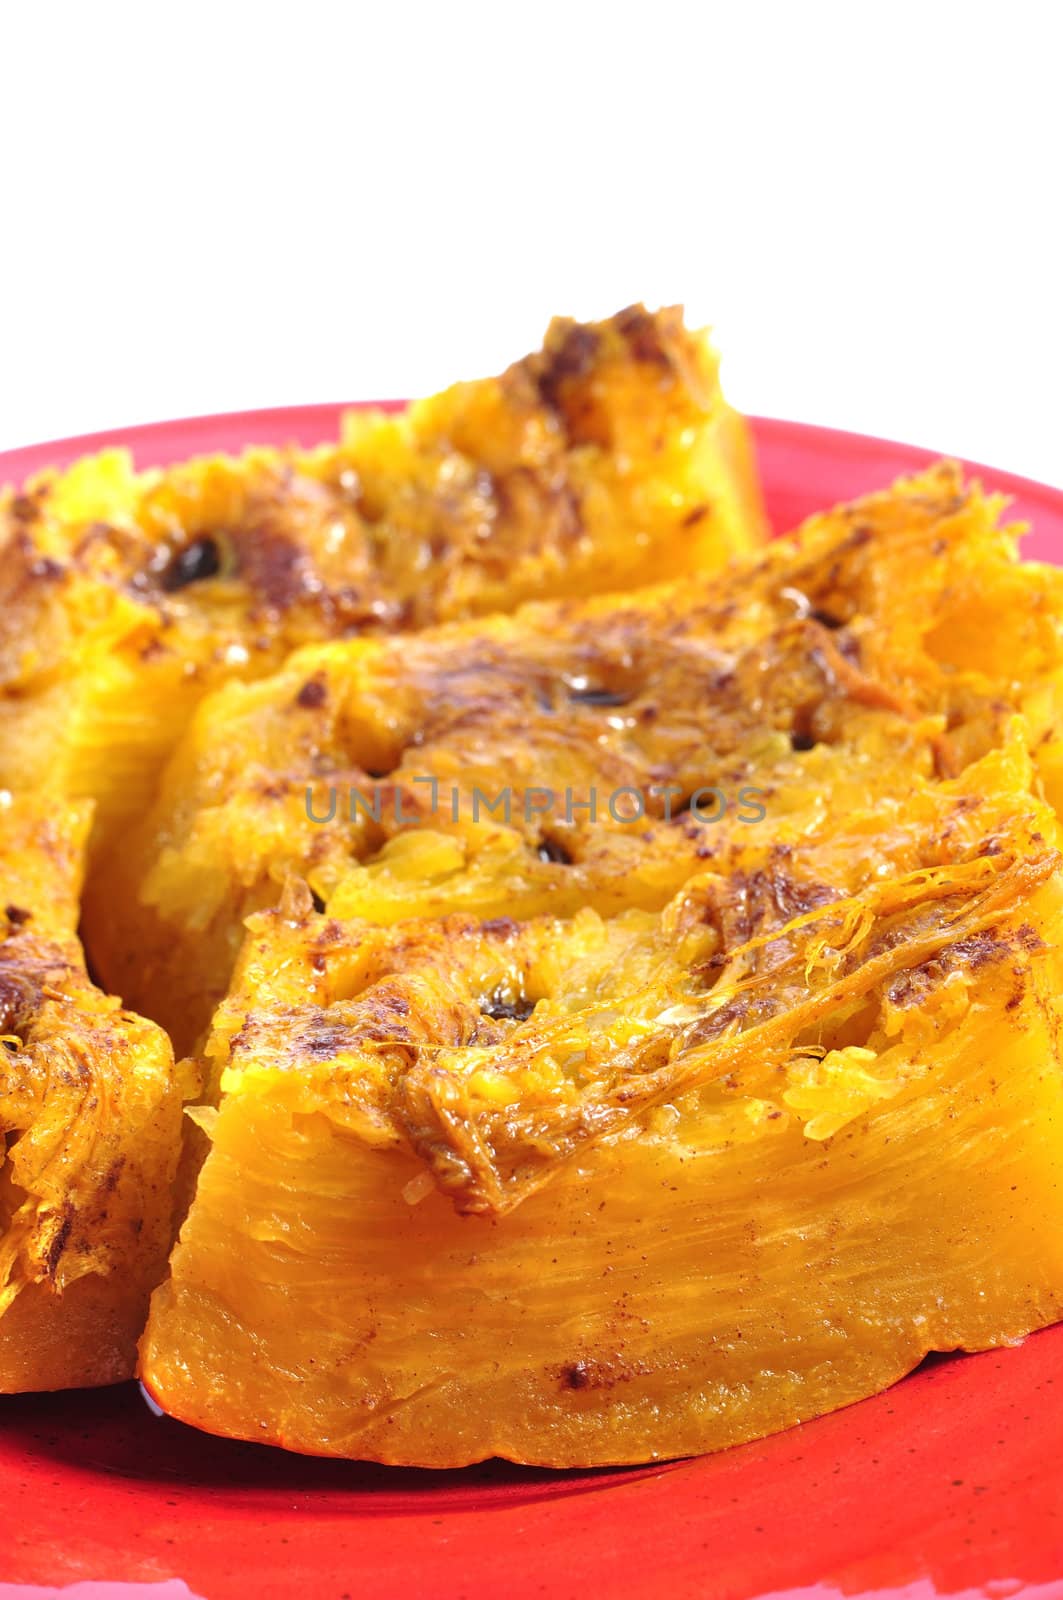 Closeup of steamed pumpkin with cinnamon and raisin on white background